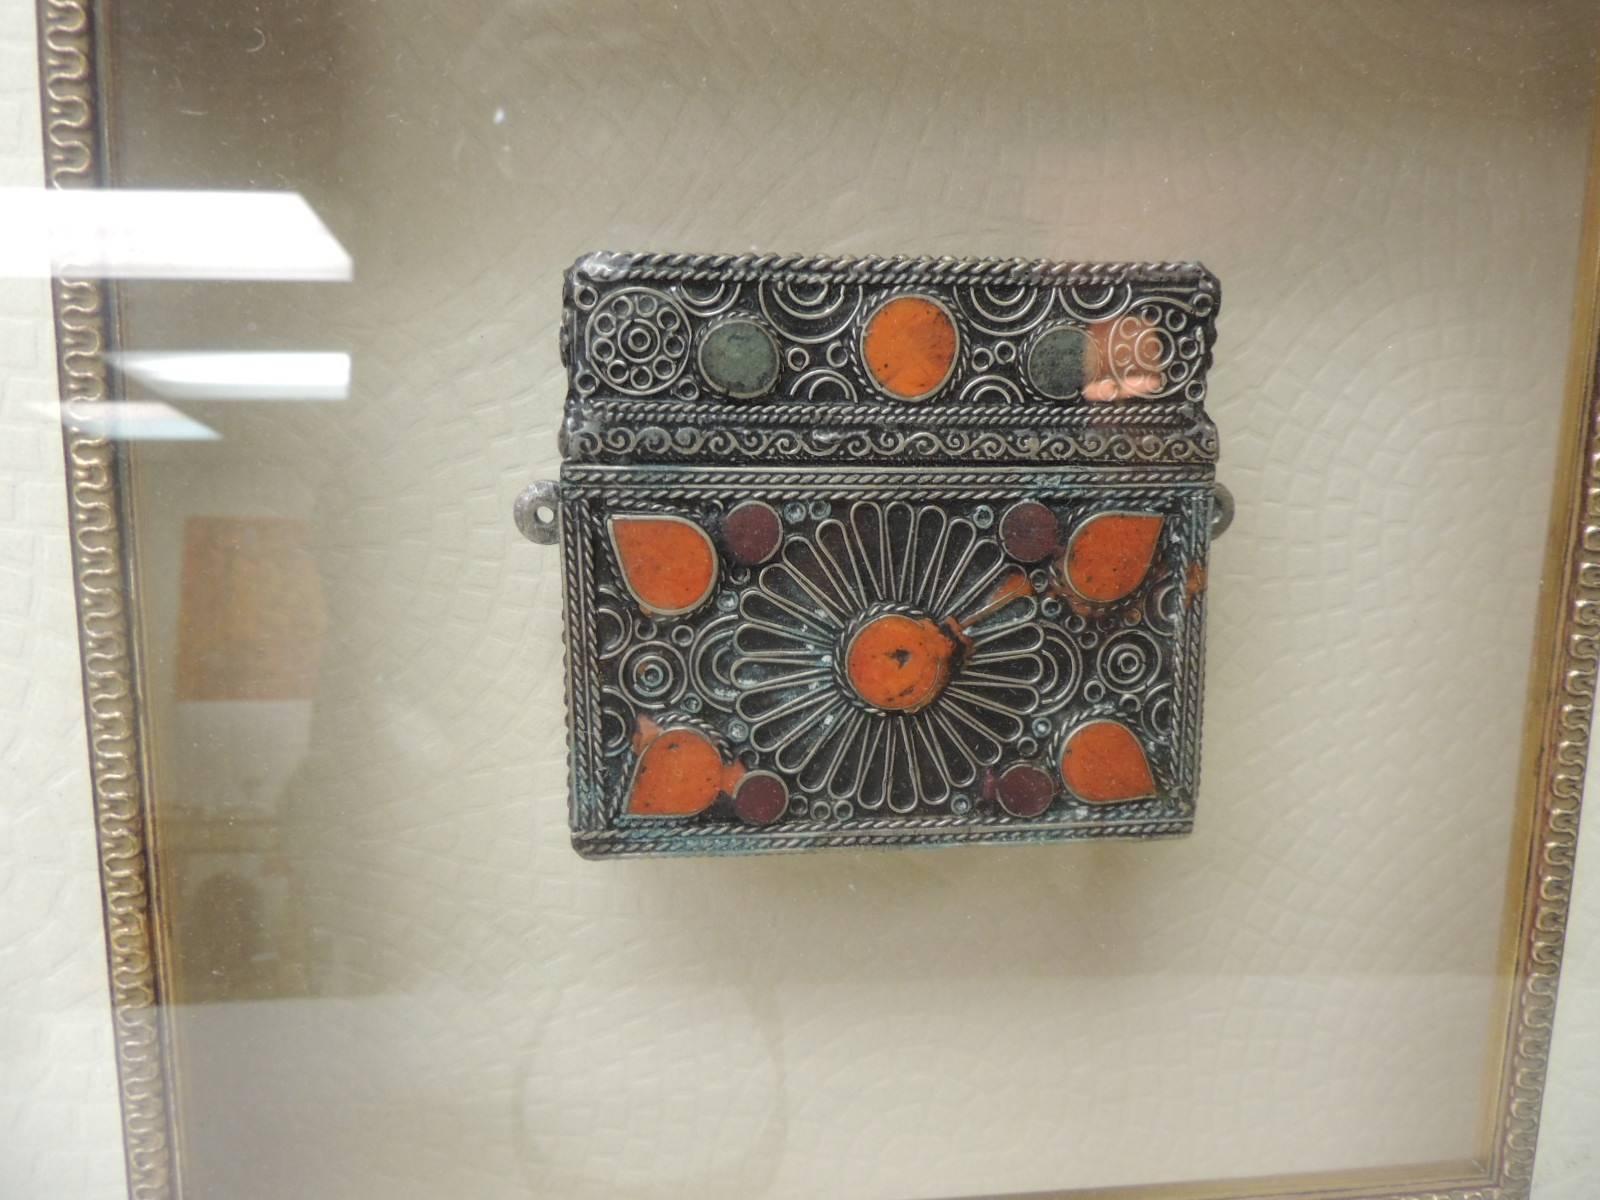 Vintage Indian metal purse mounted on shadow box with wood frame
Antique silver small vintage Indian purse with intricate detailing including enamel details to look like coral. Framed in a new wood gold leaf shadow box style. In shades of gold,